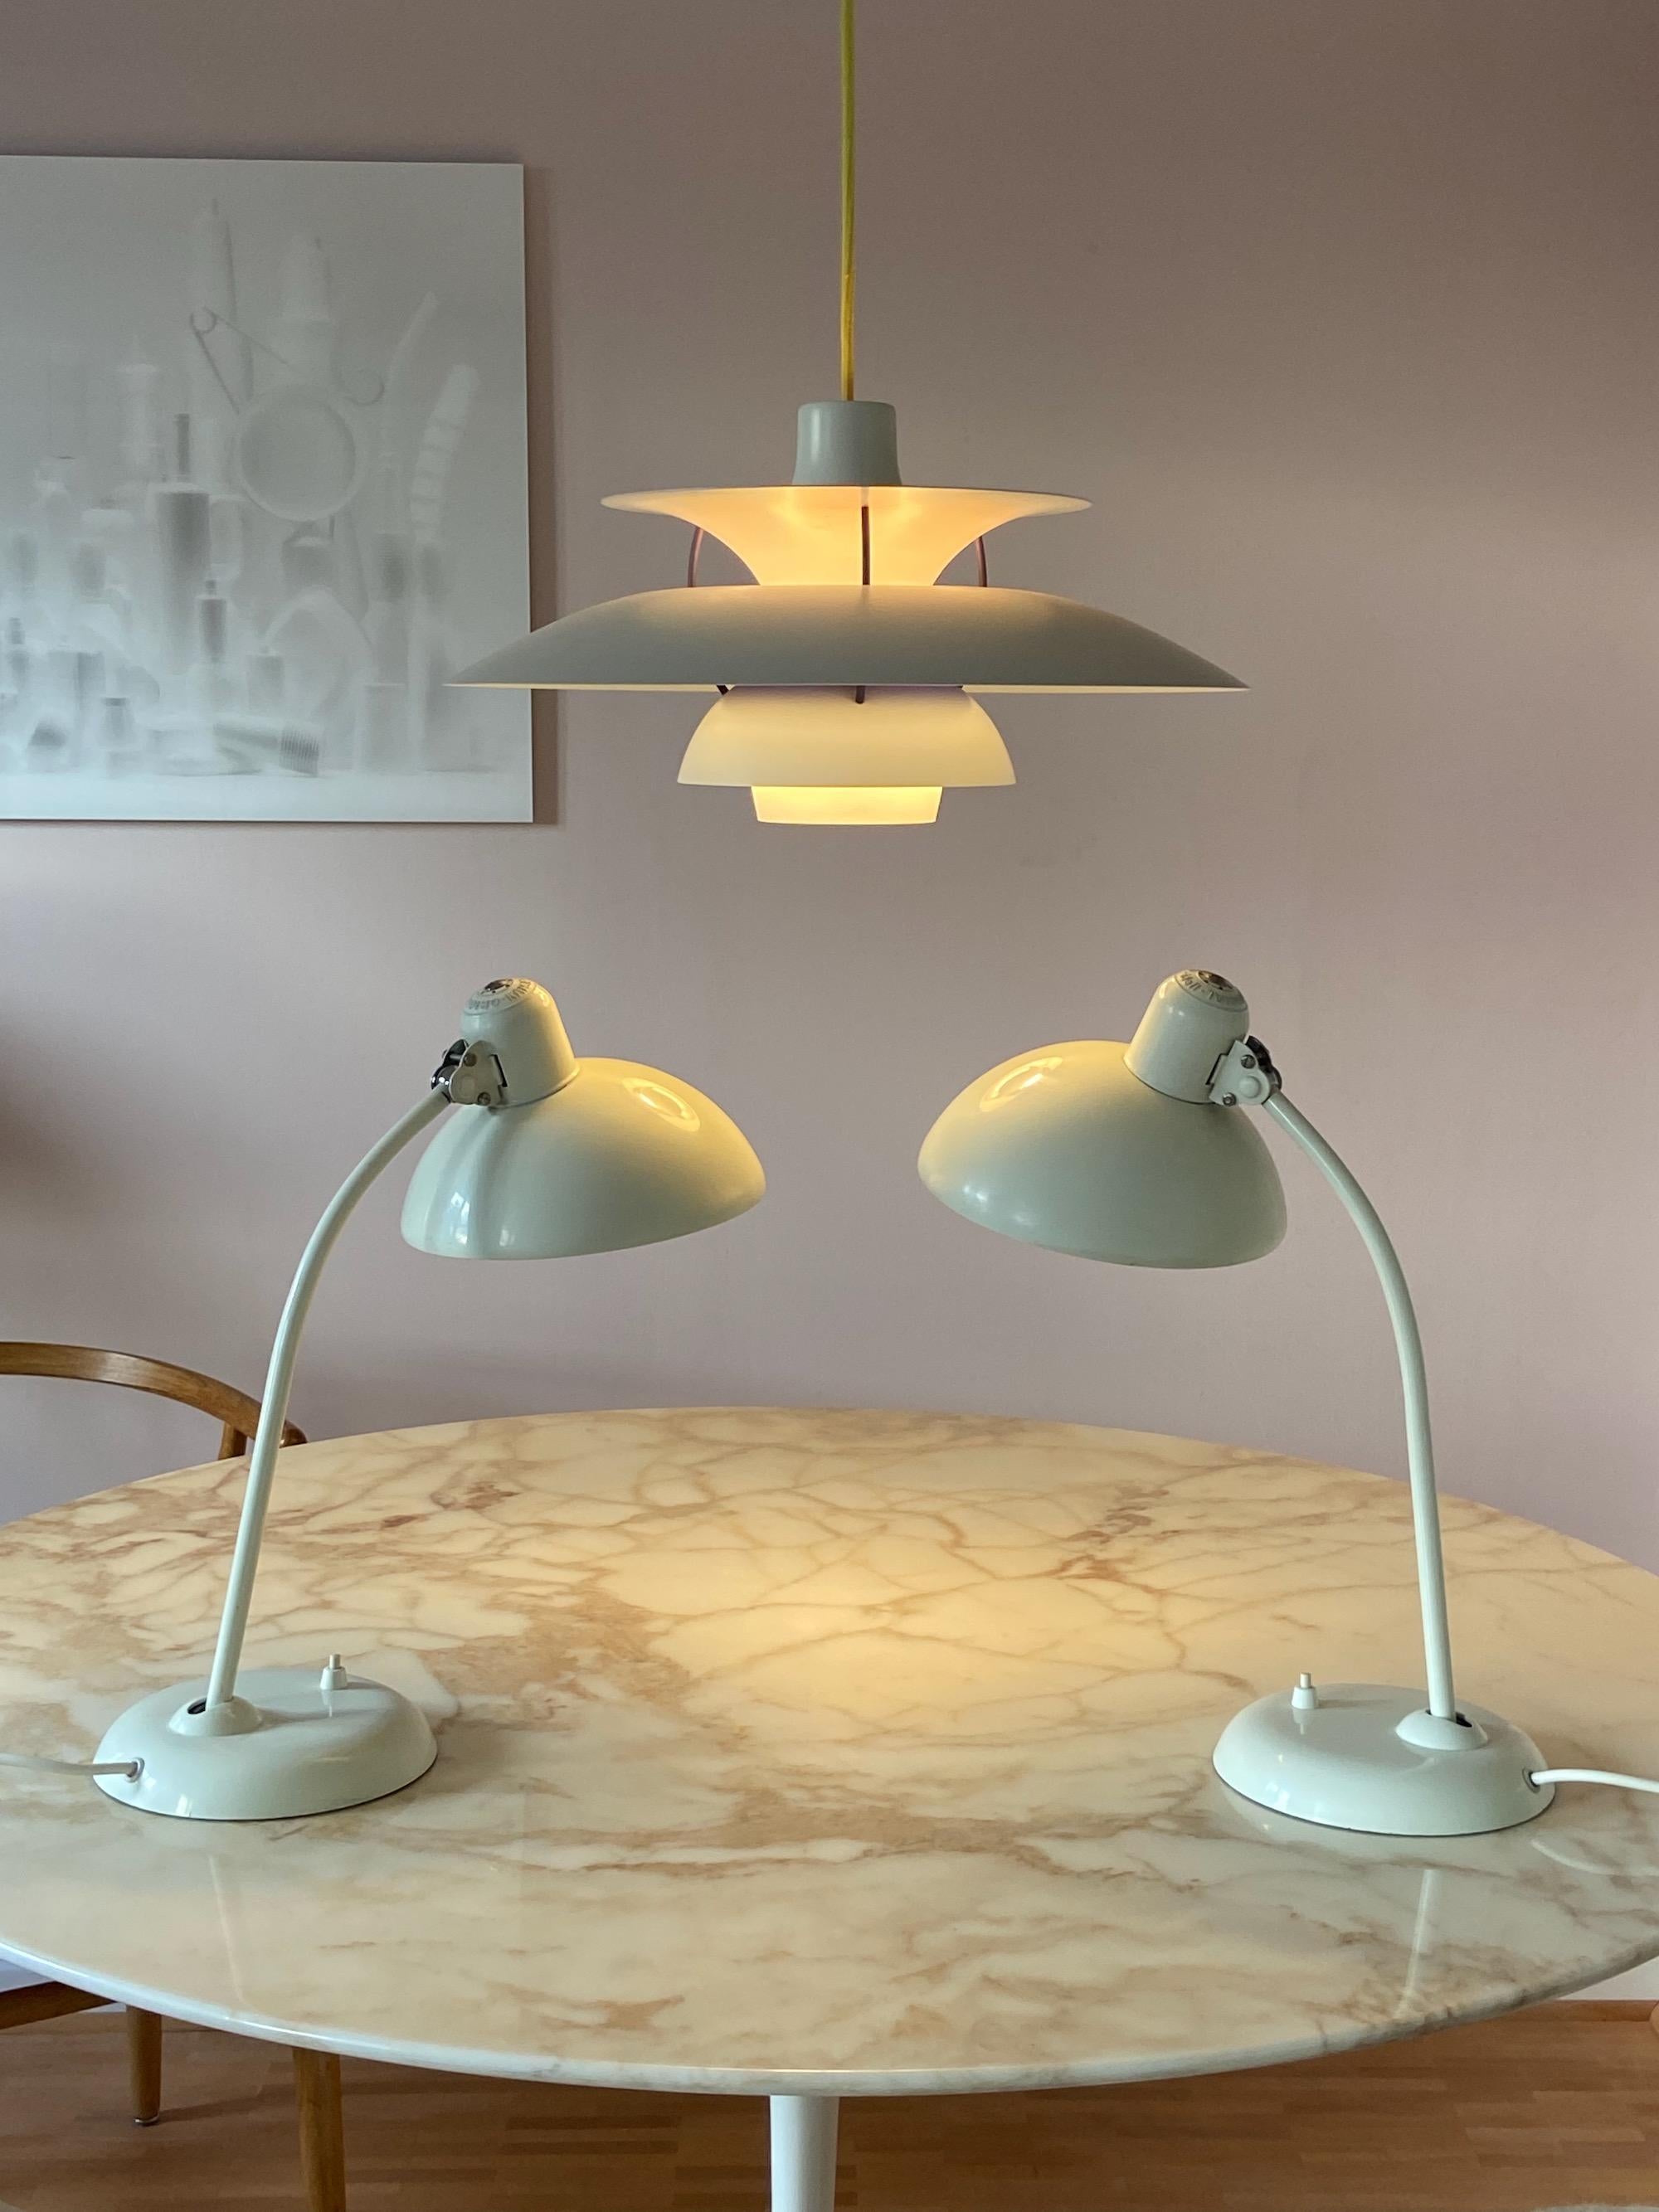 Set of 2 Christian Dell Table Lamps 6556 by Kaiser Idell Bauhaus, Germany 12